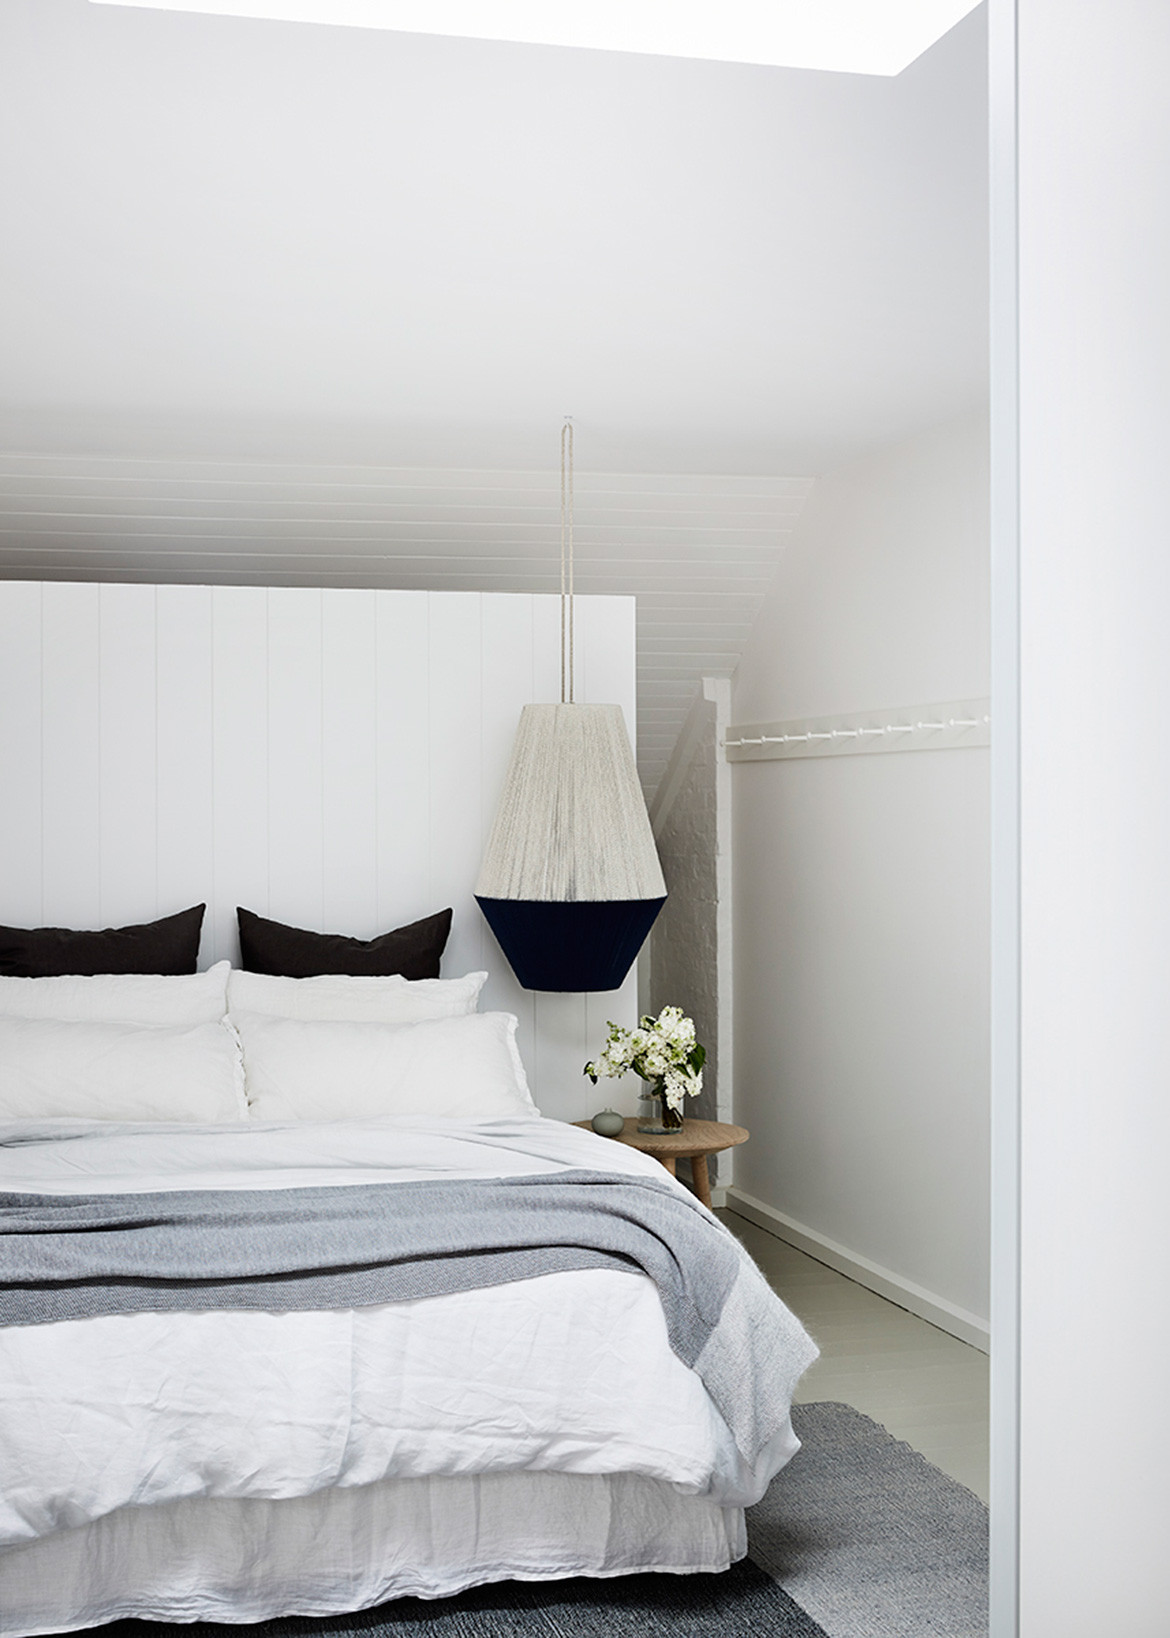 Moor Street Residence Whiting Architects cc Tess Kelly bedroom